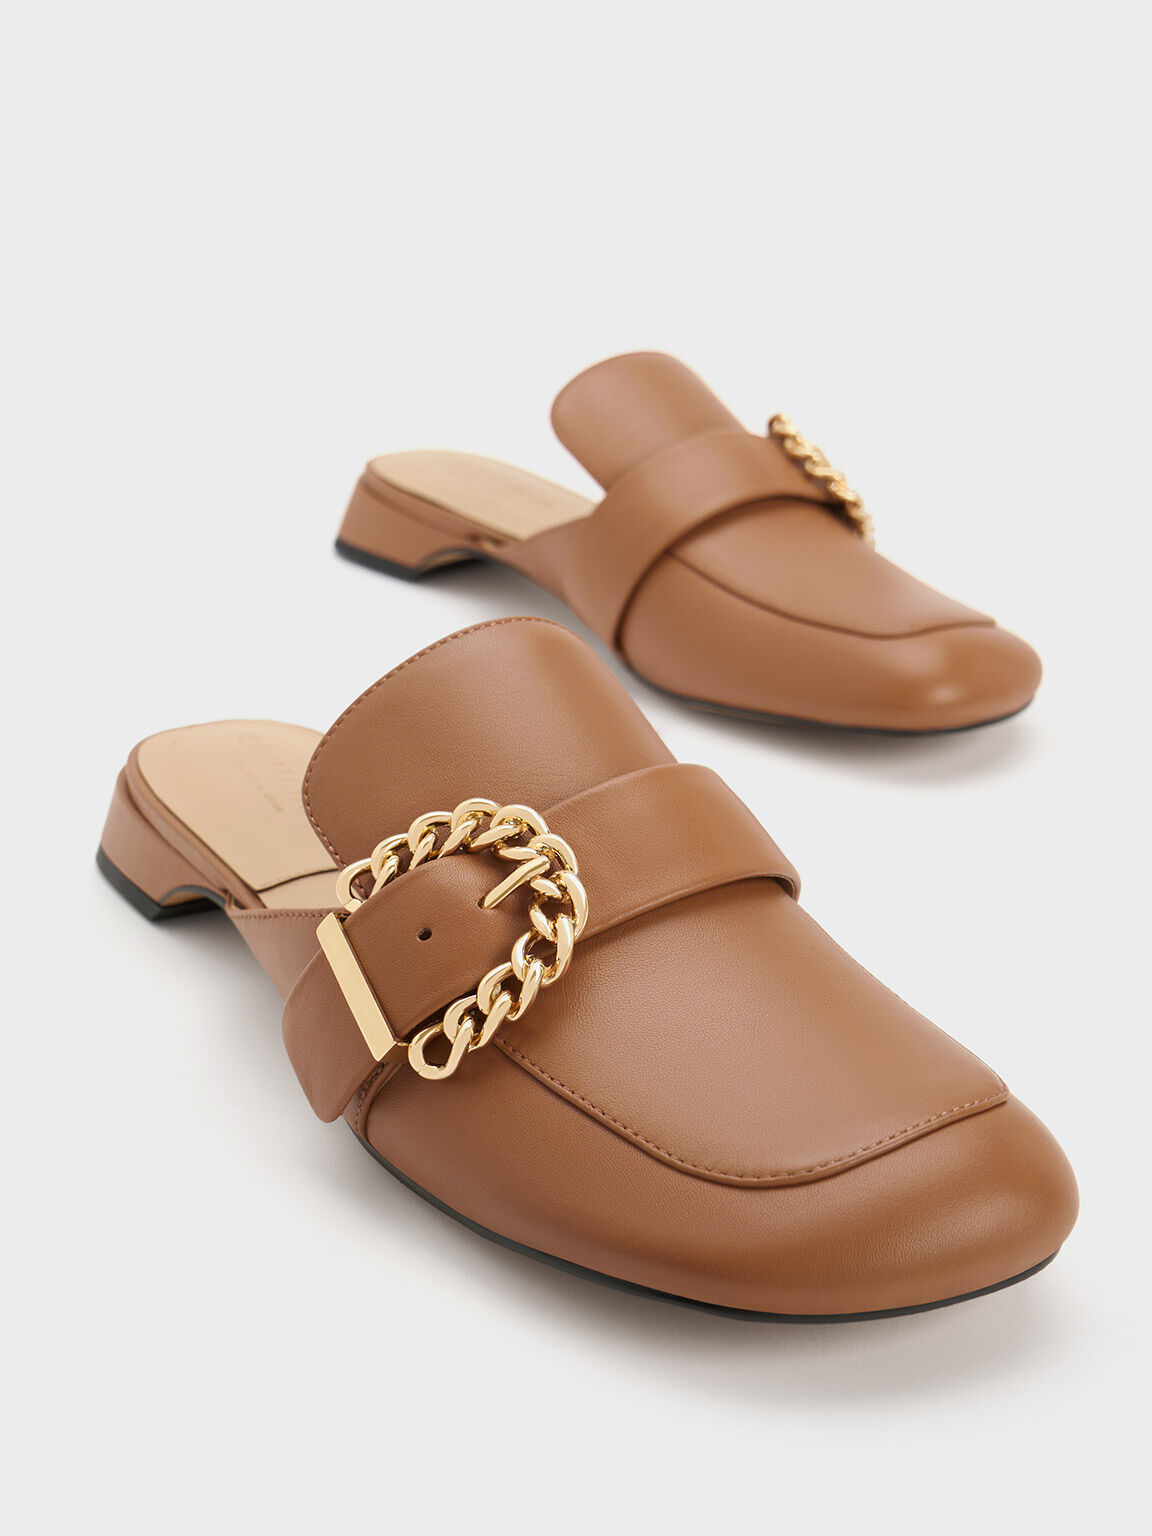 Chain-Buckled Leather Mules, Brown, hi-res